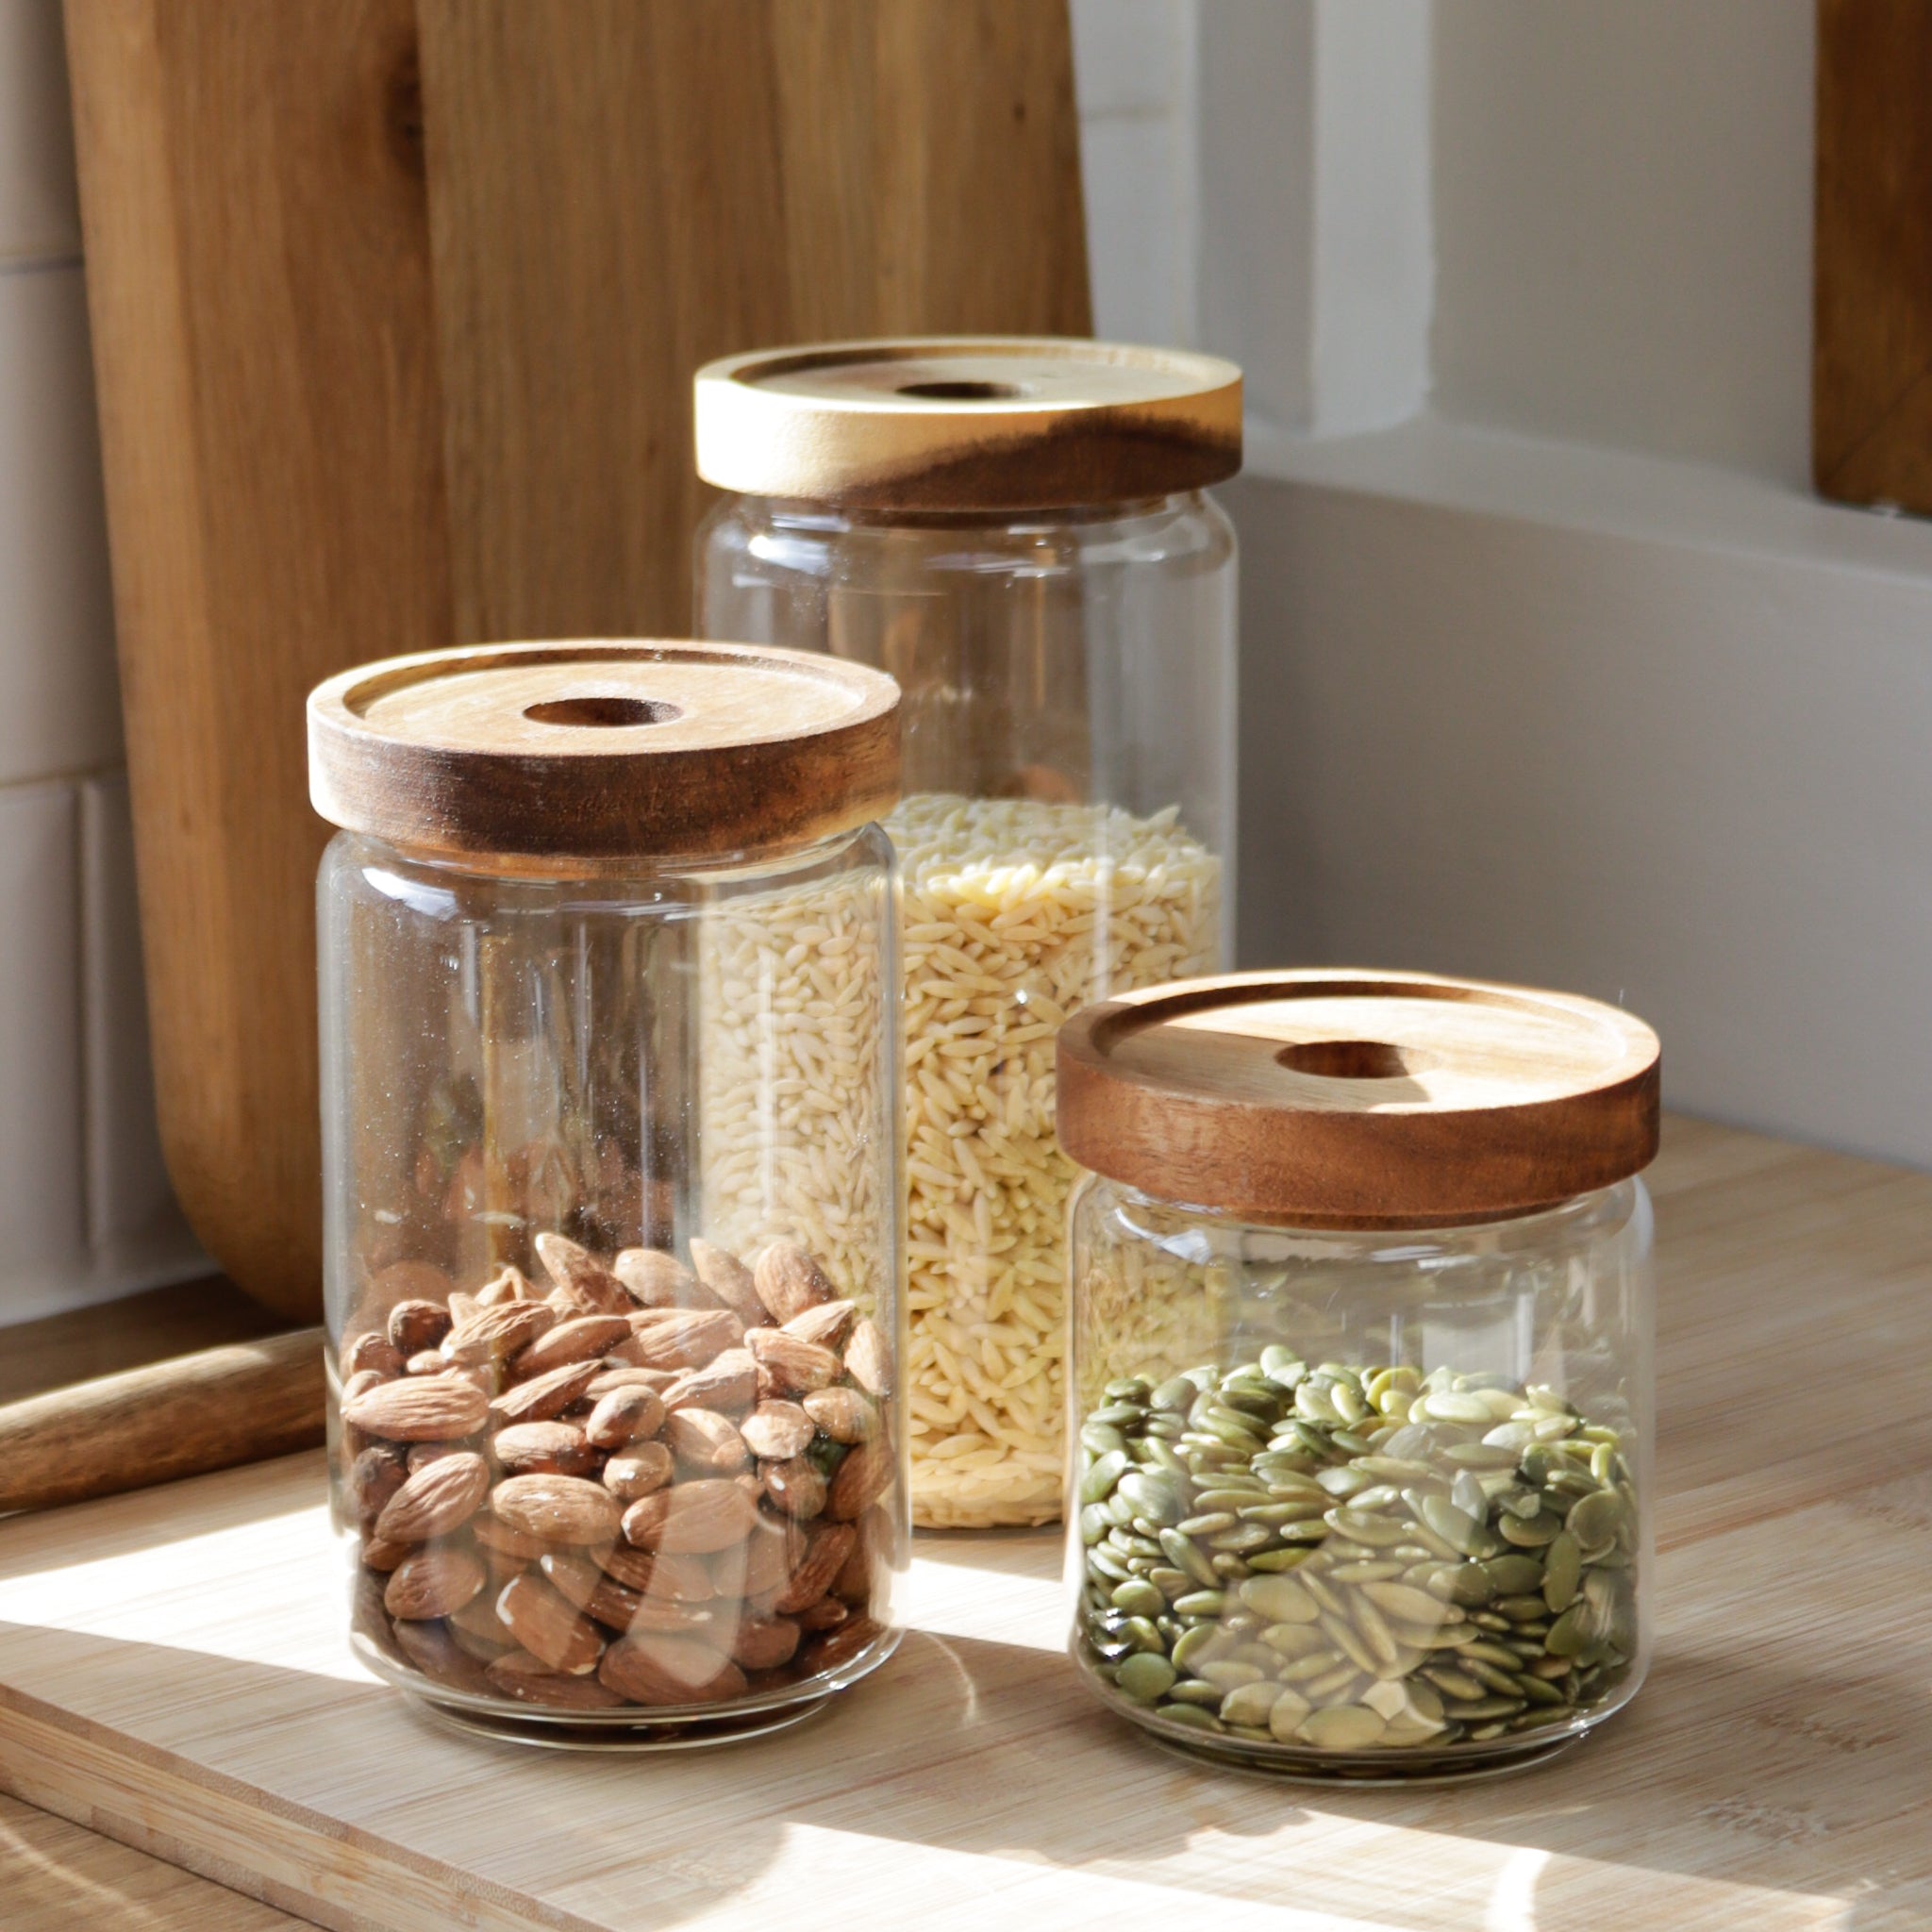 Acacia Storage Container - Large, Tall Glass Jar